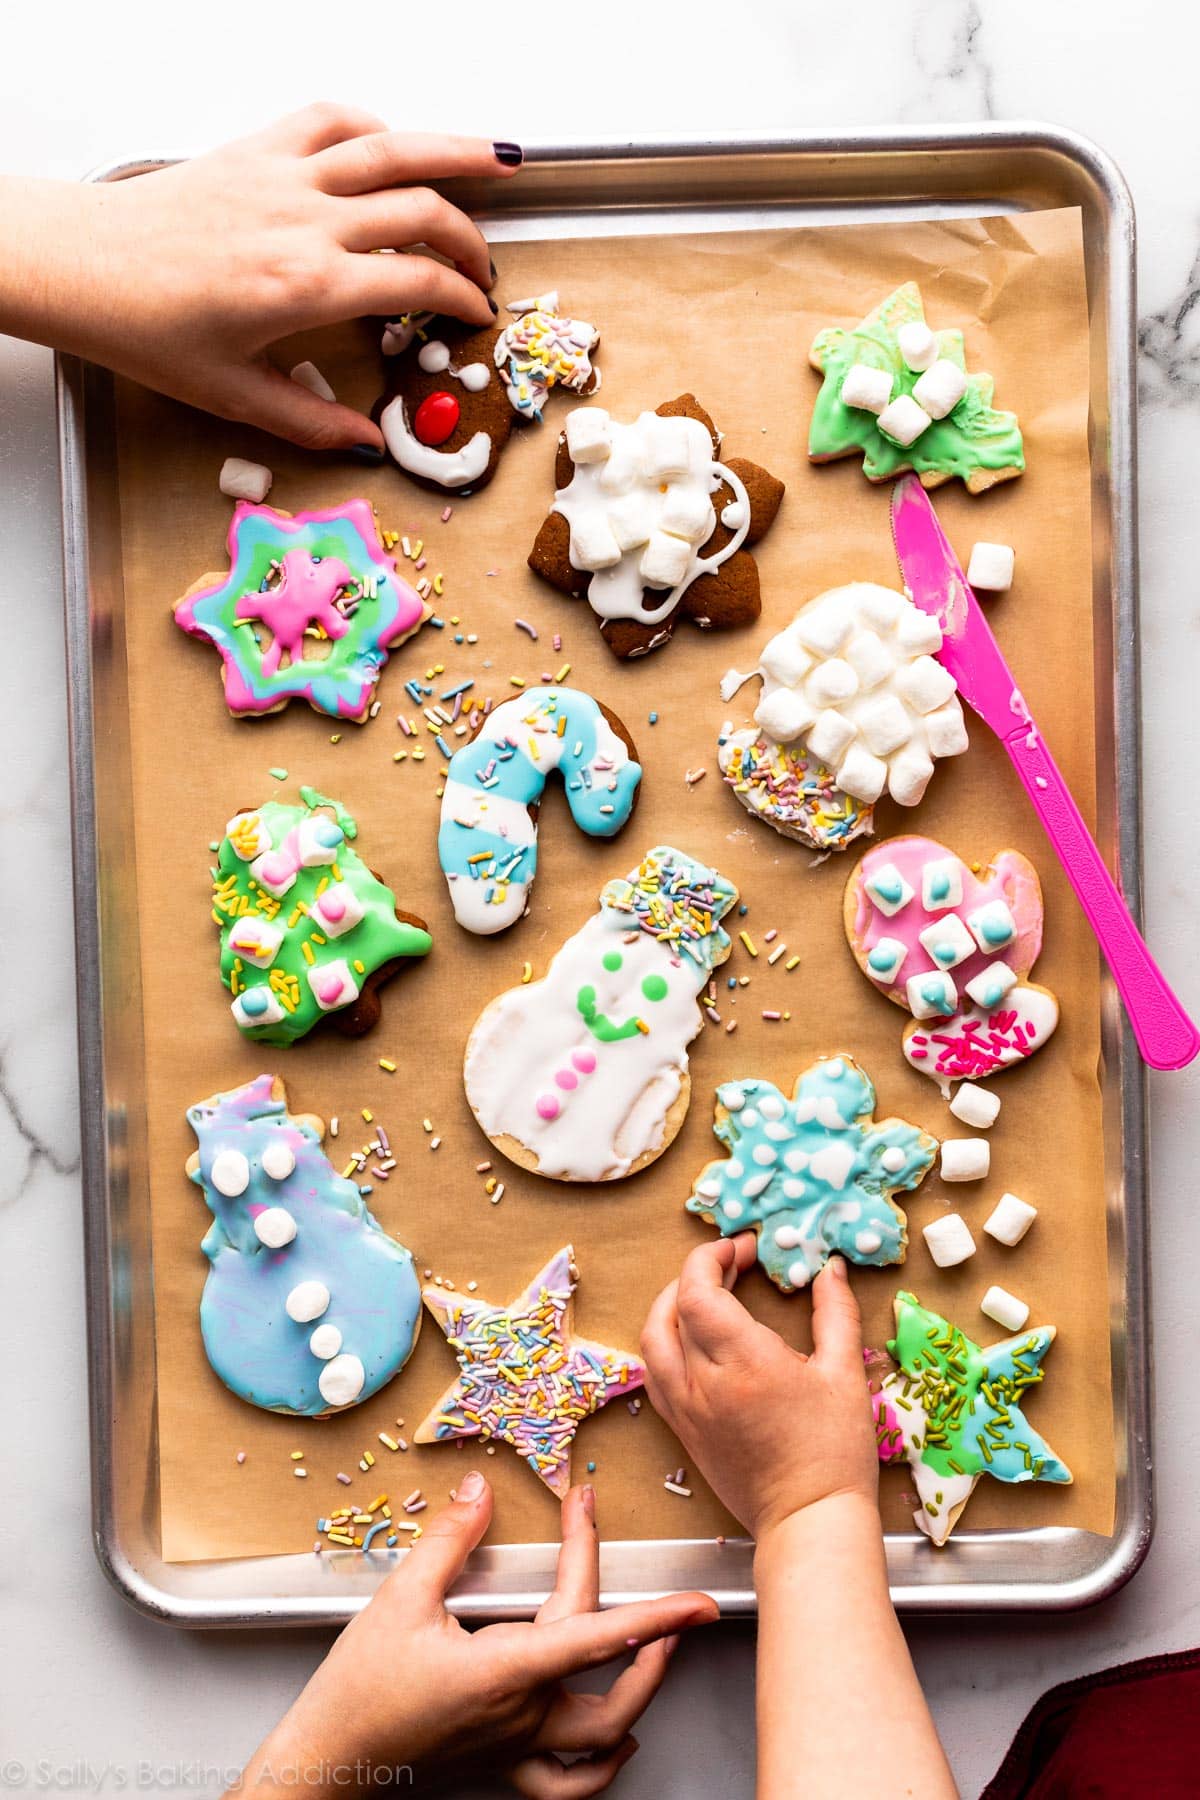 How to Host a Cookie Decorating Day (& Free Printable) - Sally's Baking  Addiction